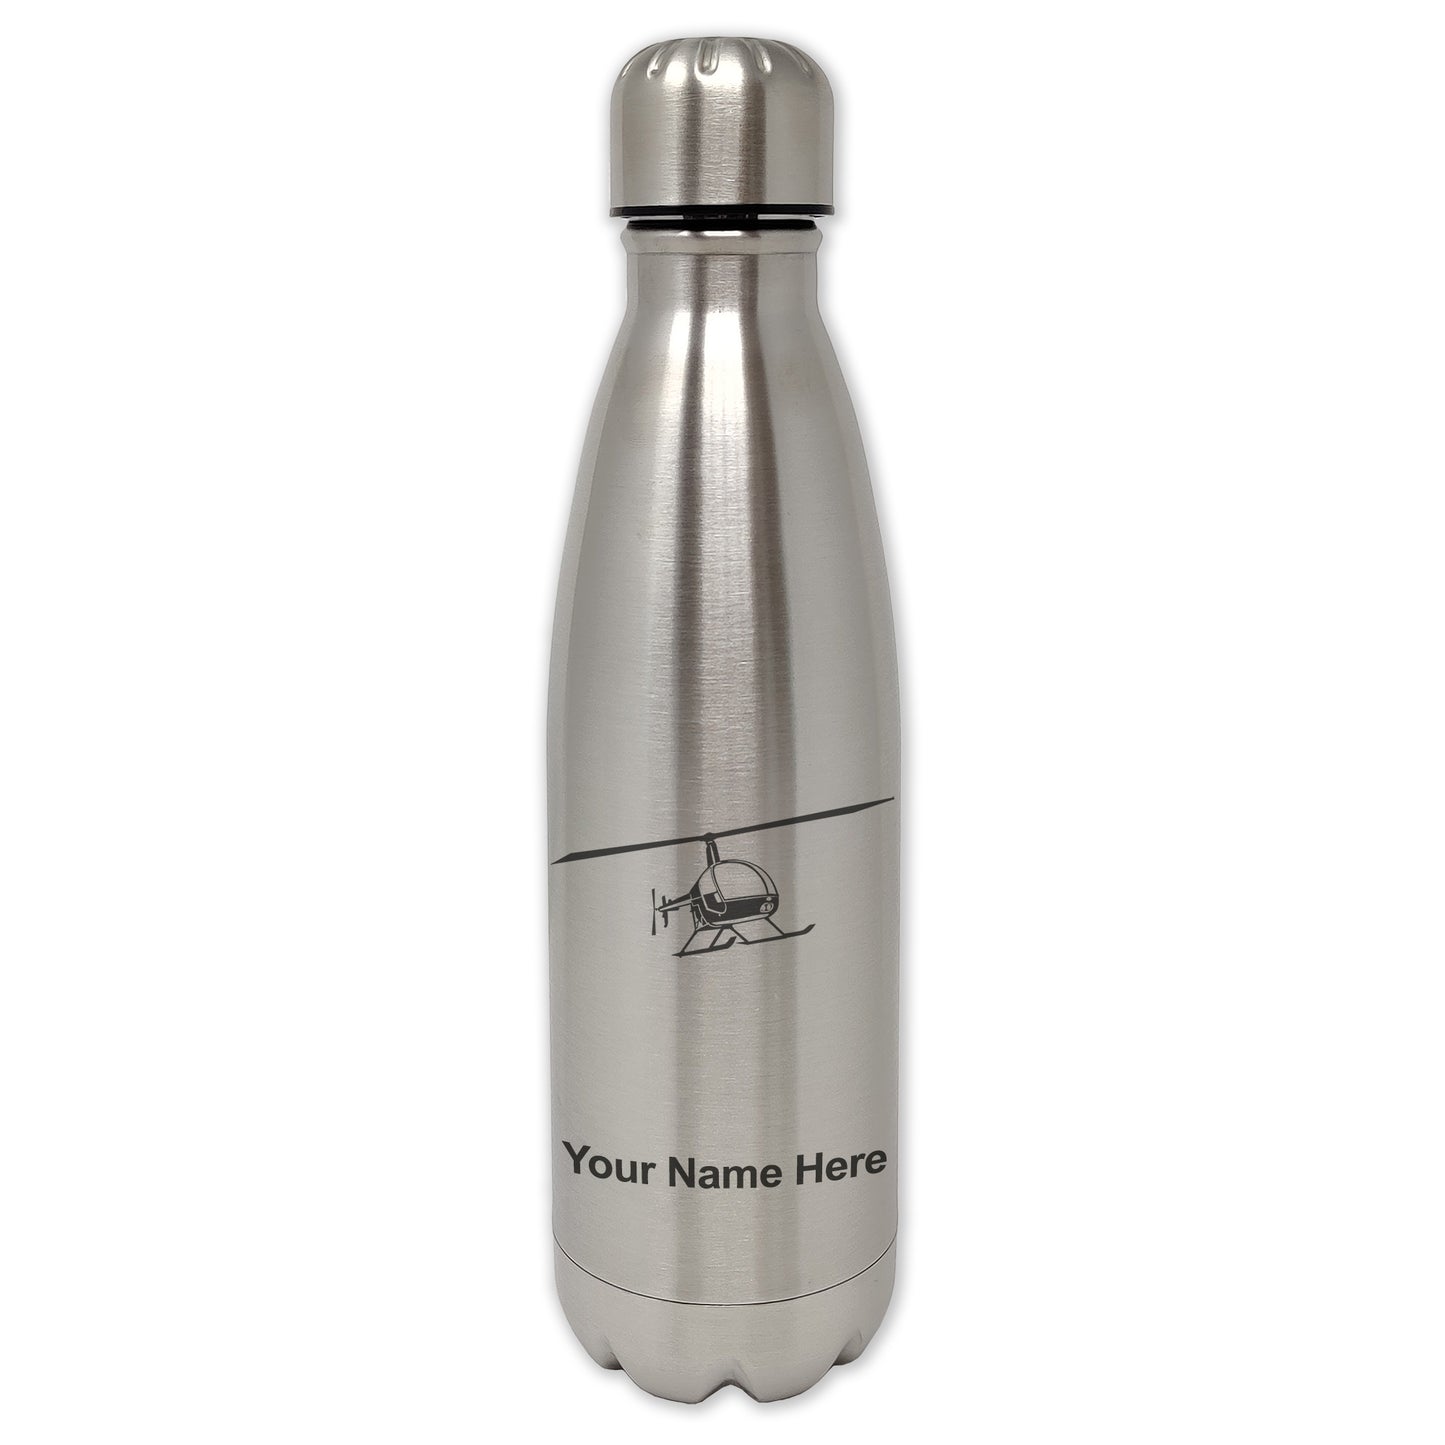 LaserGram Single Wall Water Bottle, Helicopter 2, Personalized Engraving Included